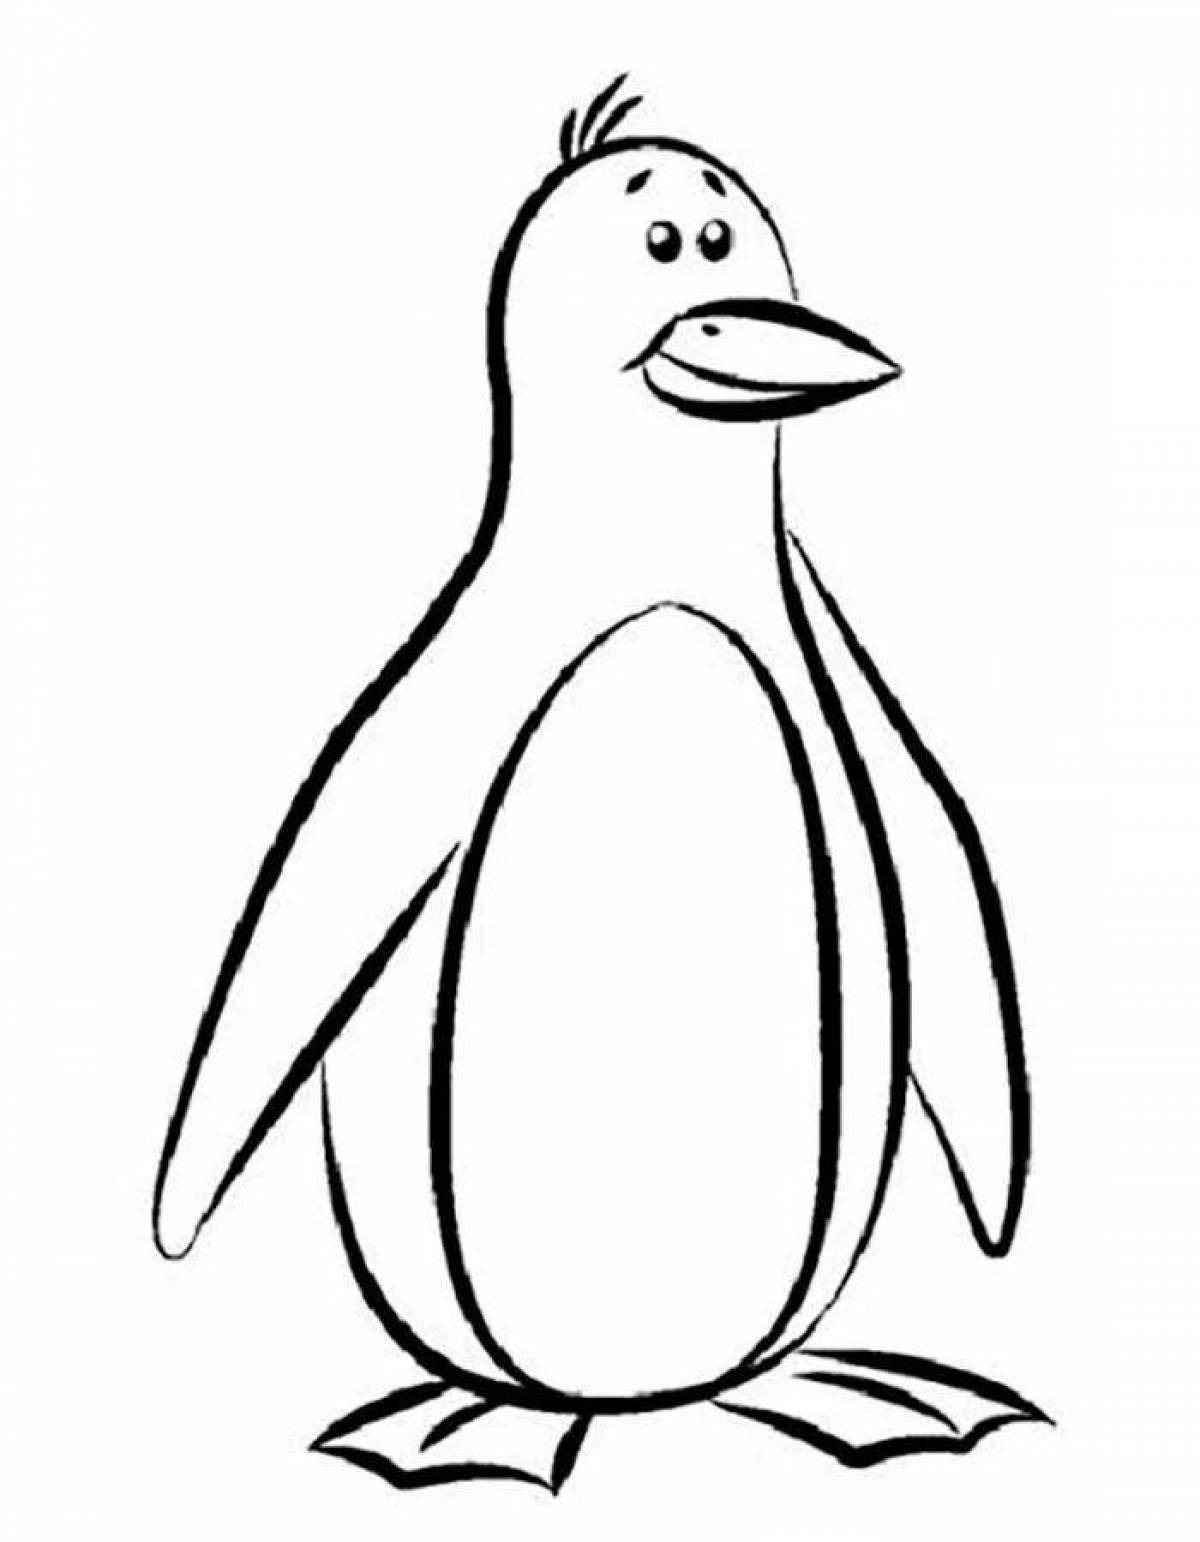 Crazy penguin coloring page